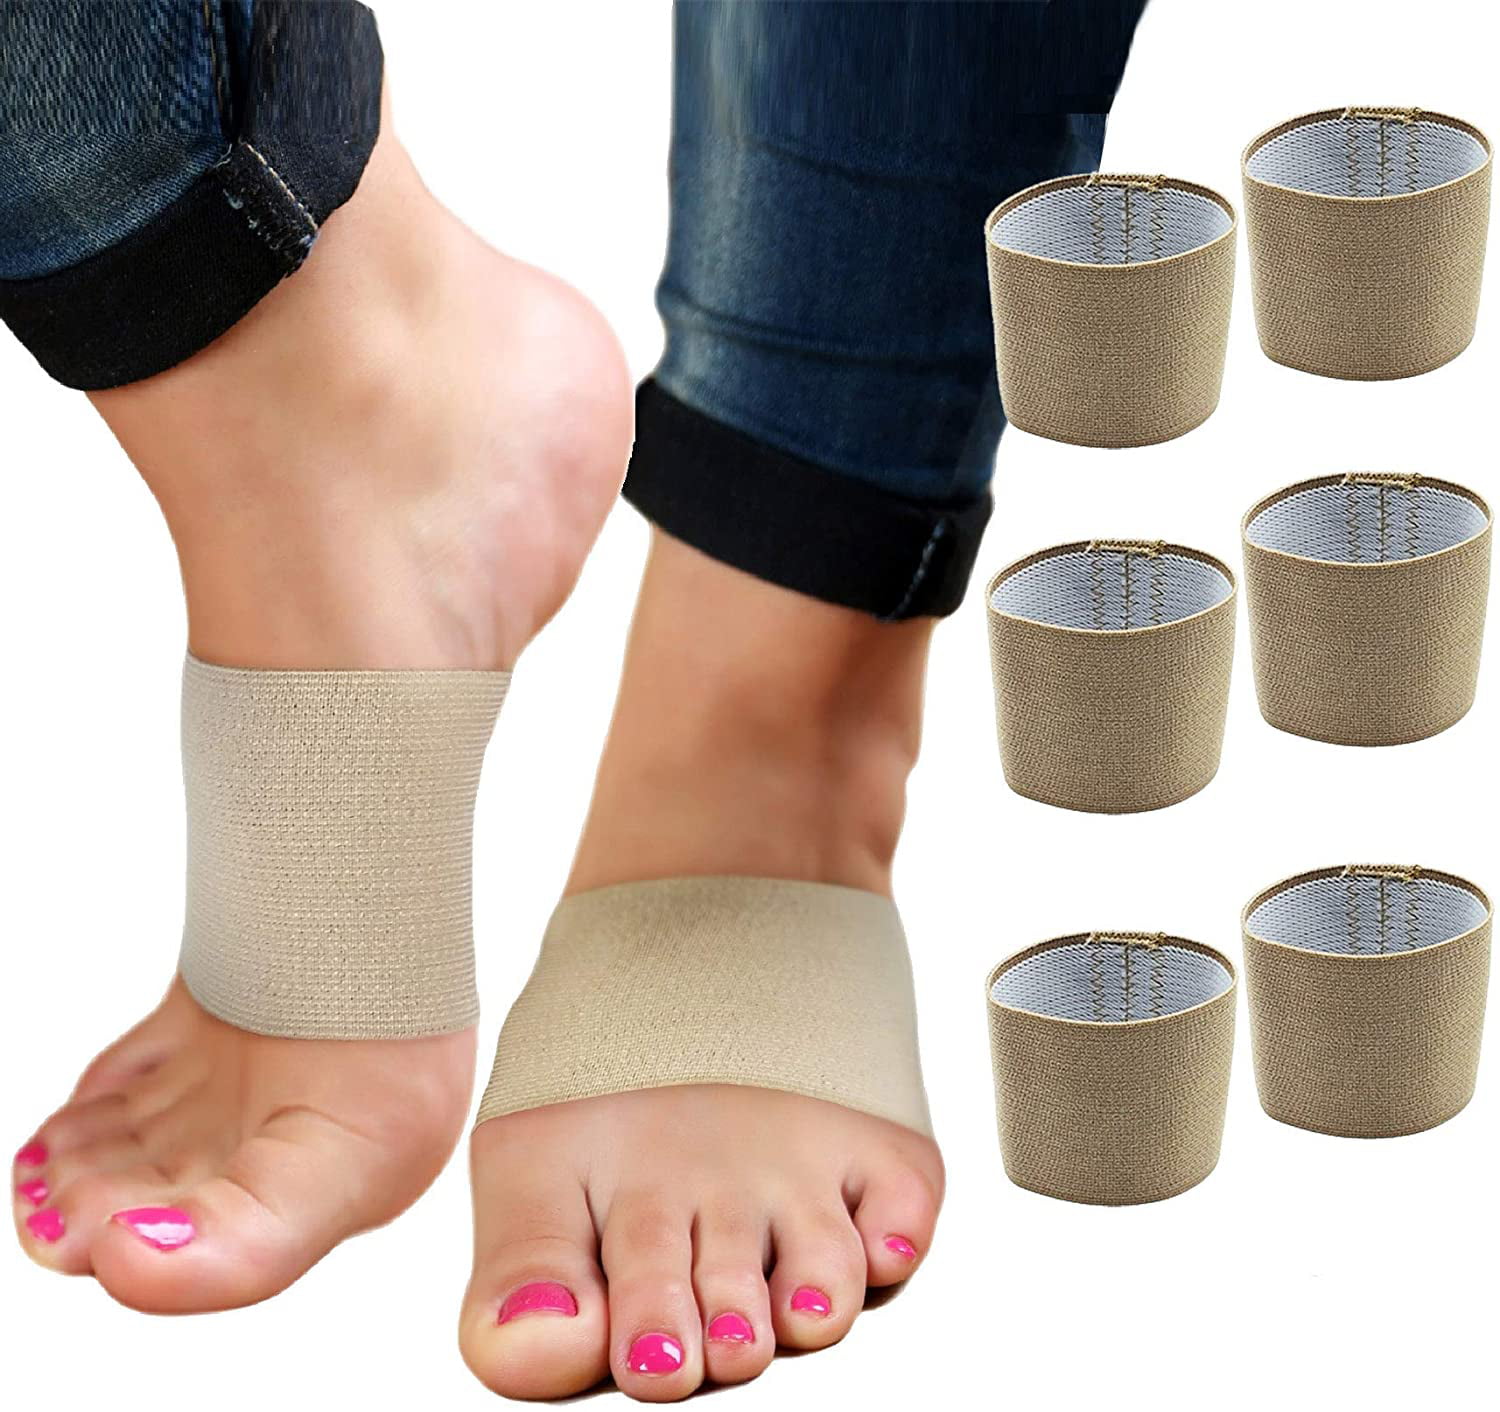 2 Plantar Fasciitis Sleeves with Carrying case High Copper Content Arch Support Brace for Plantar Fasciitis Support Braces for Foot Care Feet Pain Nouvelle Arch Support Flat Arches Heel Support 